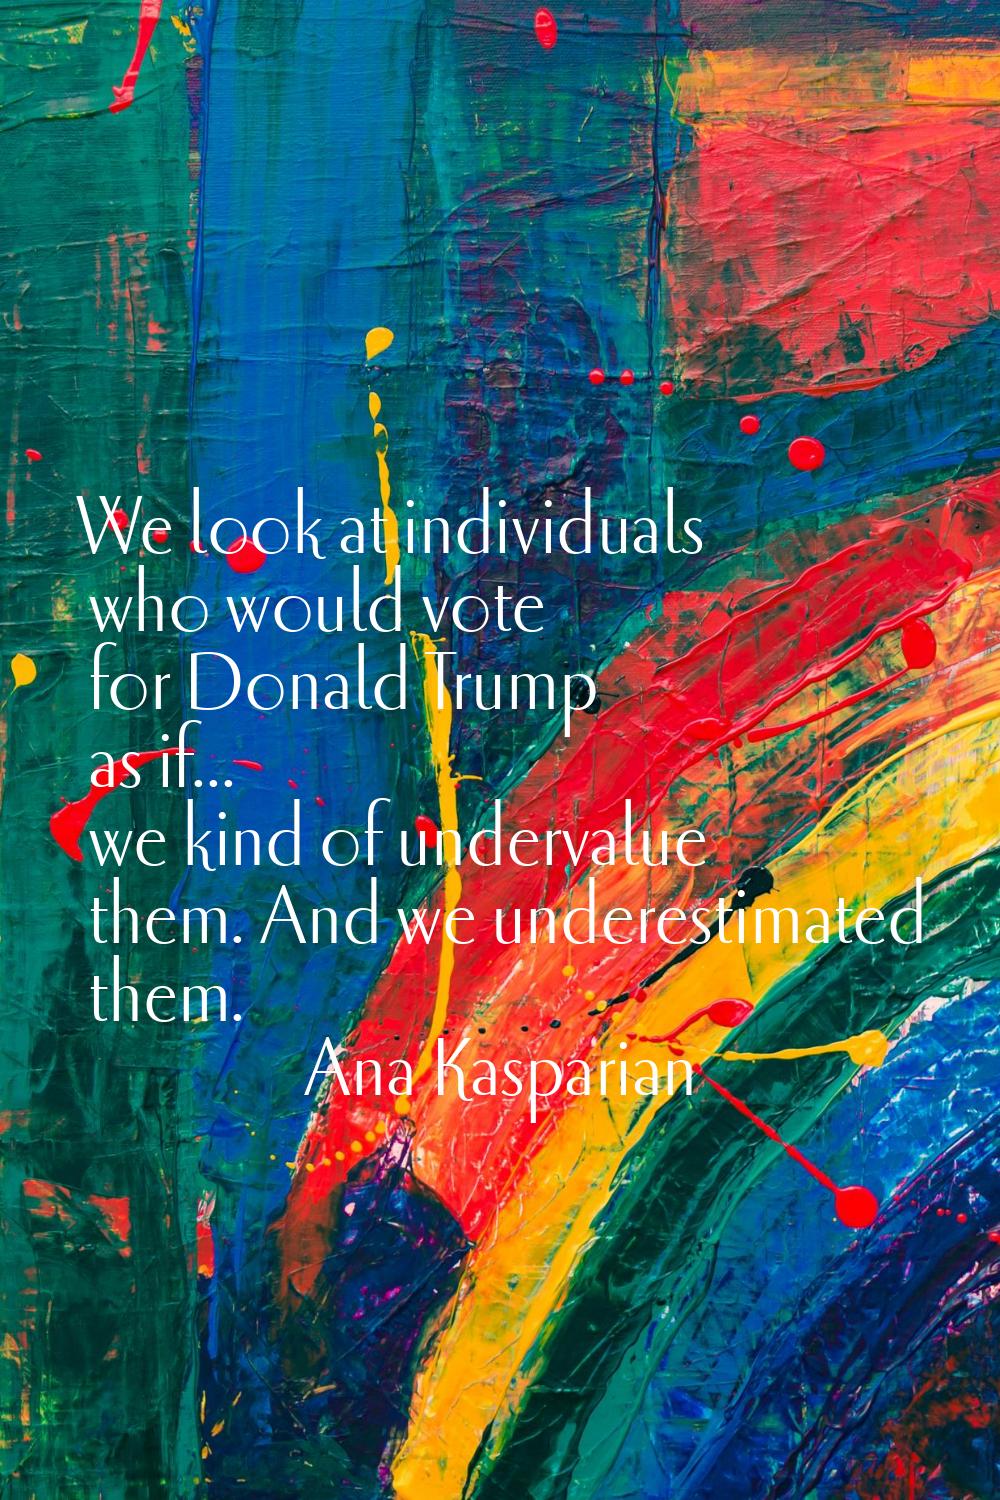 We look at individuals who would vote for Donald Trump as if... we kind of undervalue them. And we 